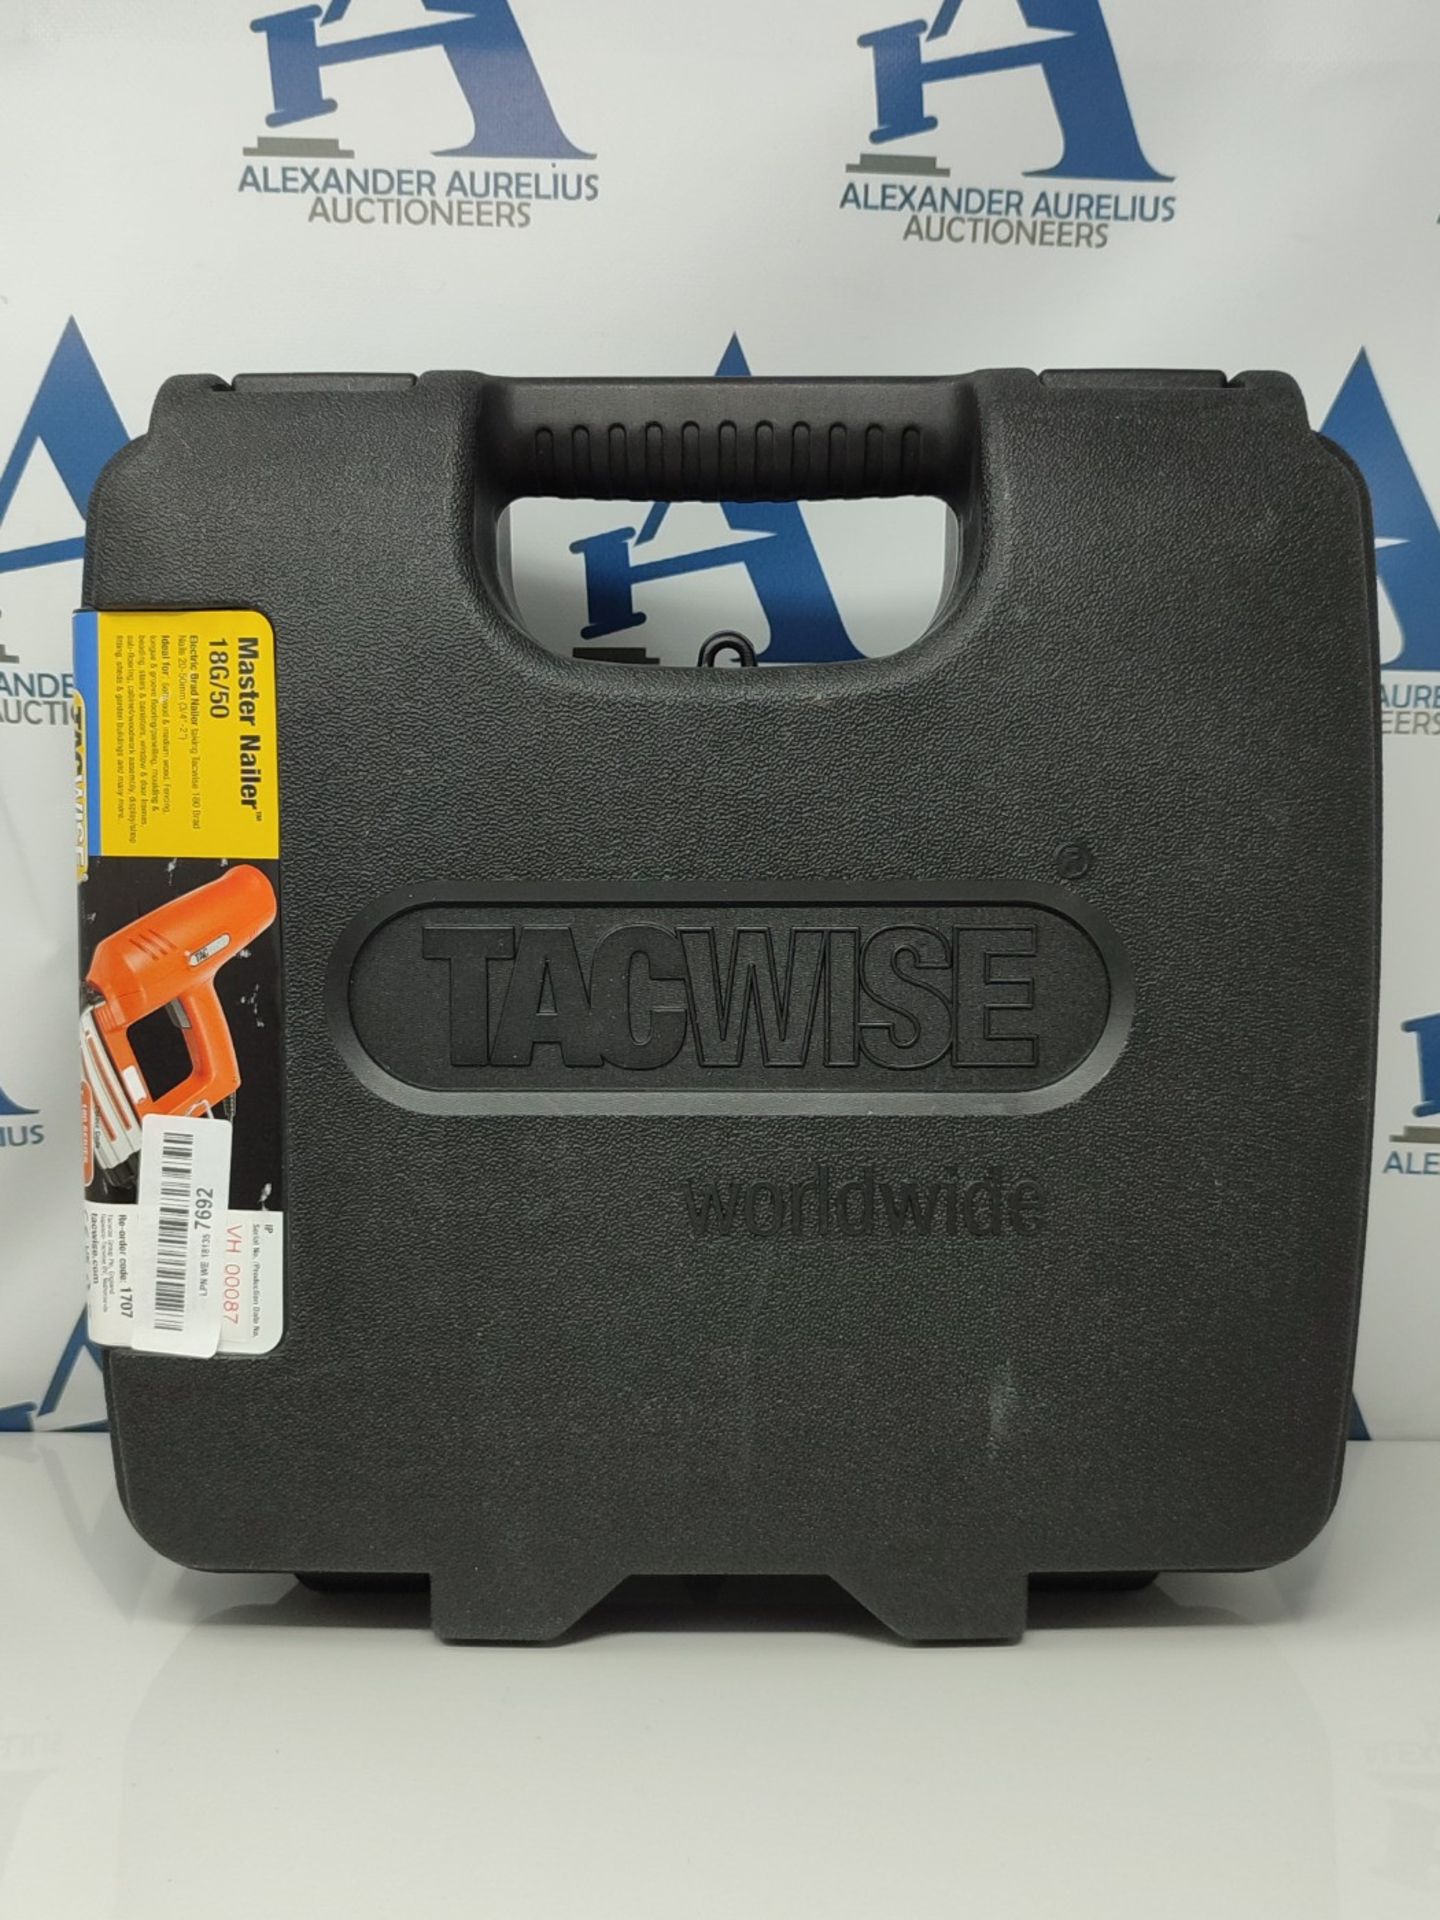 RRP £139.00 Tacwise 1707 Master Nailer 18G/50, Electric Brad Nail Gun with 1,000 Nails, Uses Type - Image 2 of 3